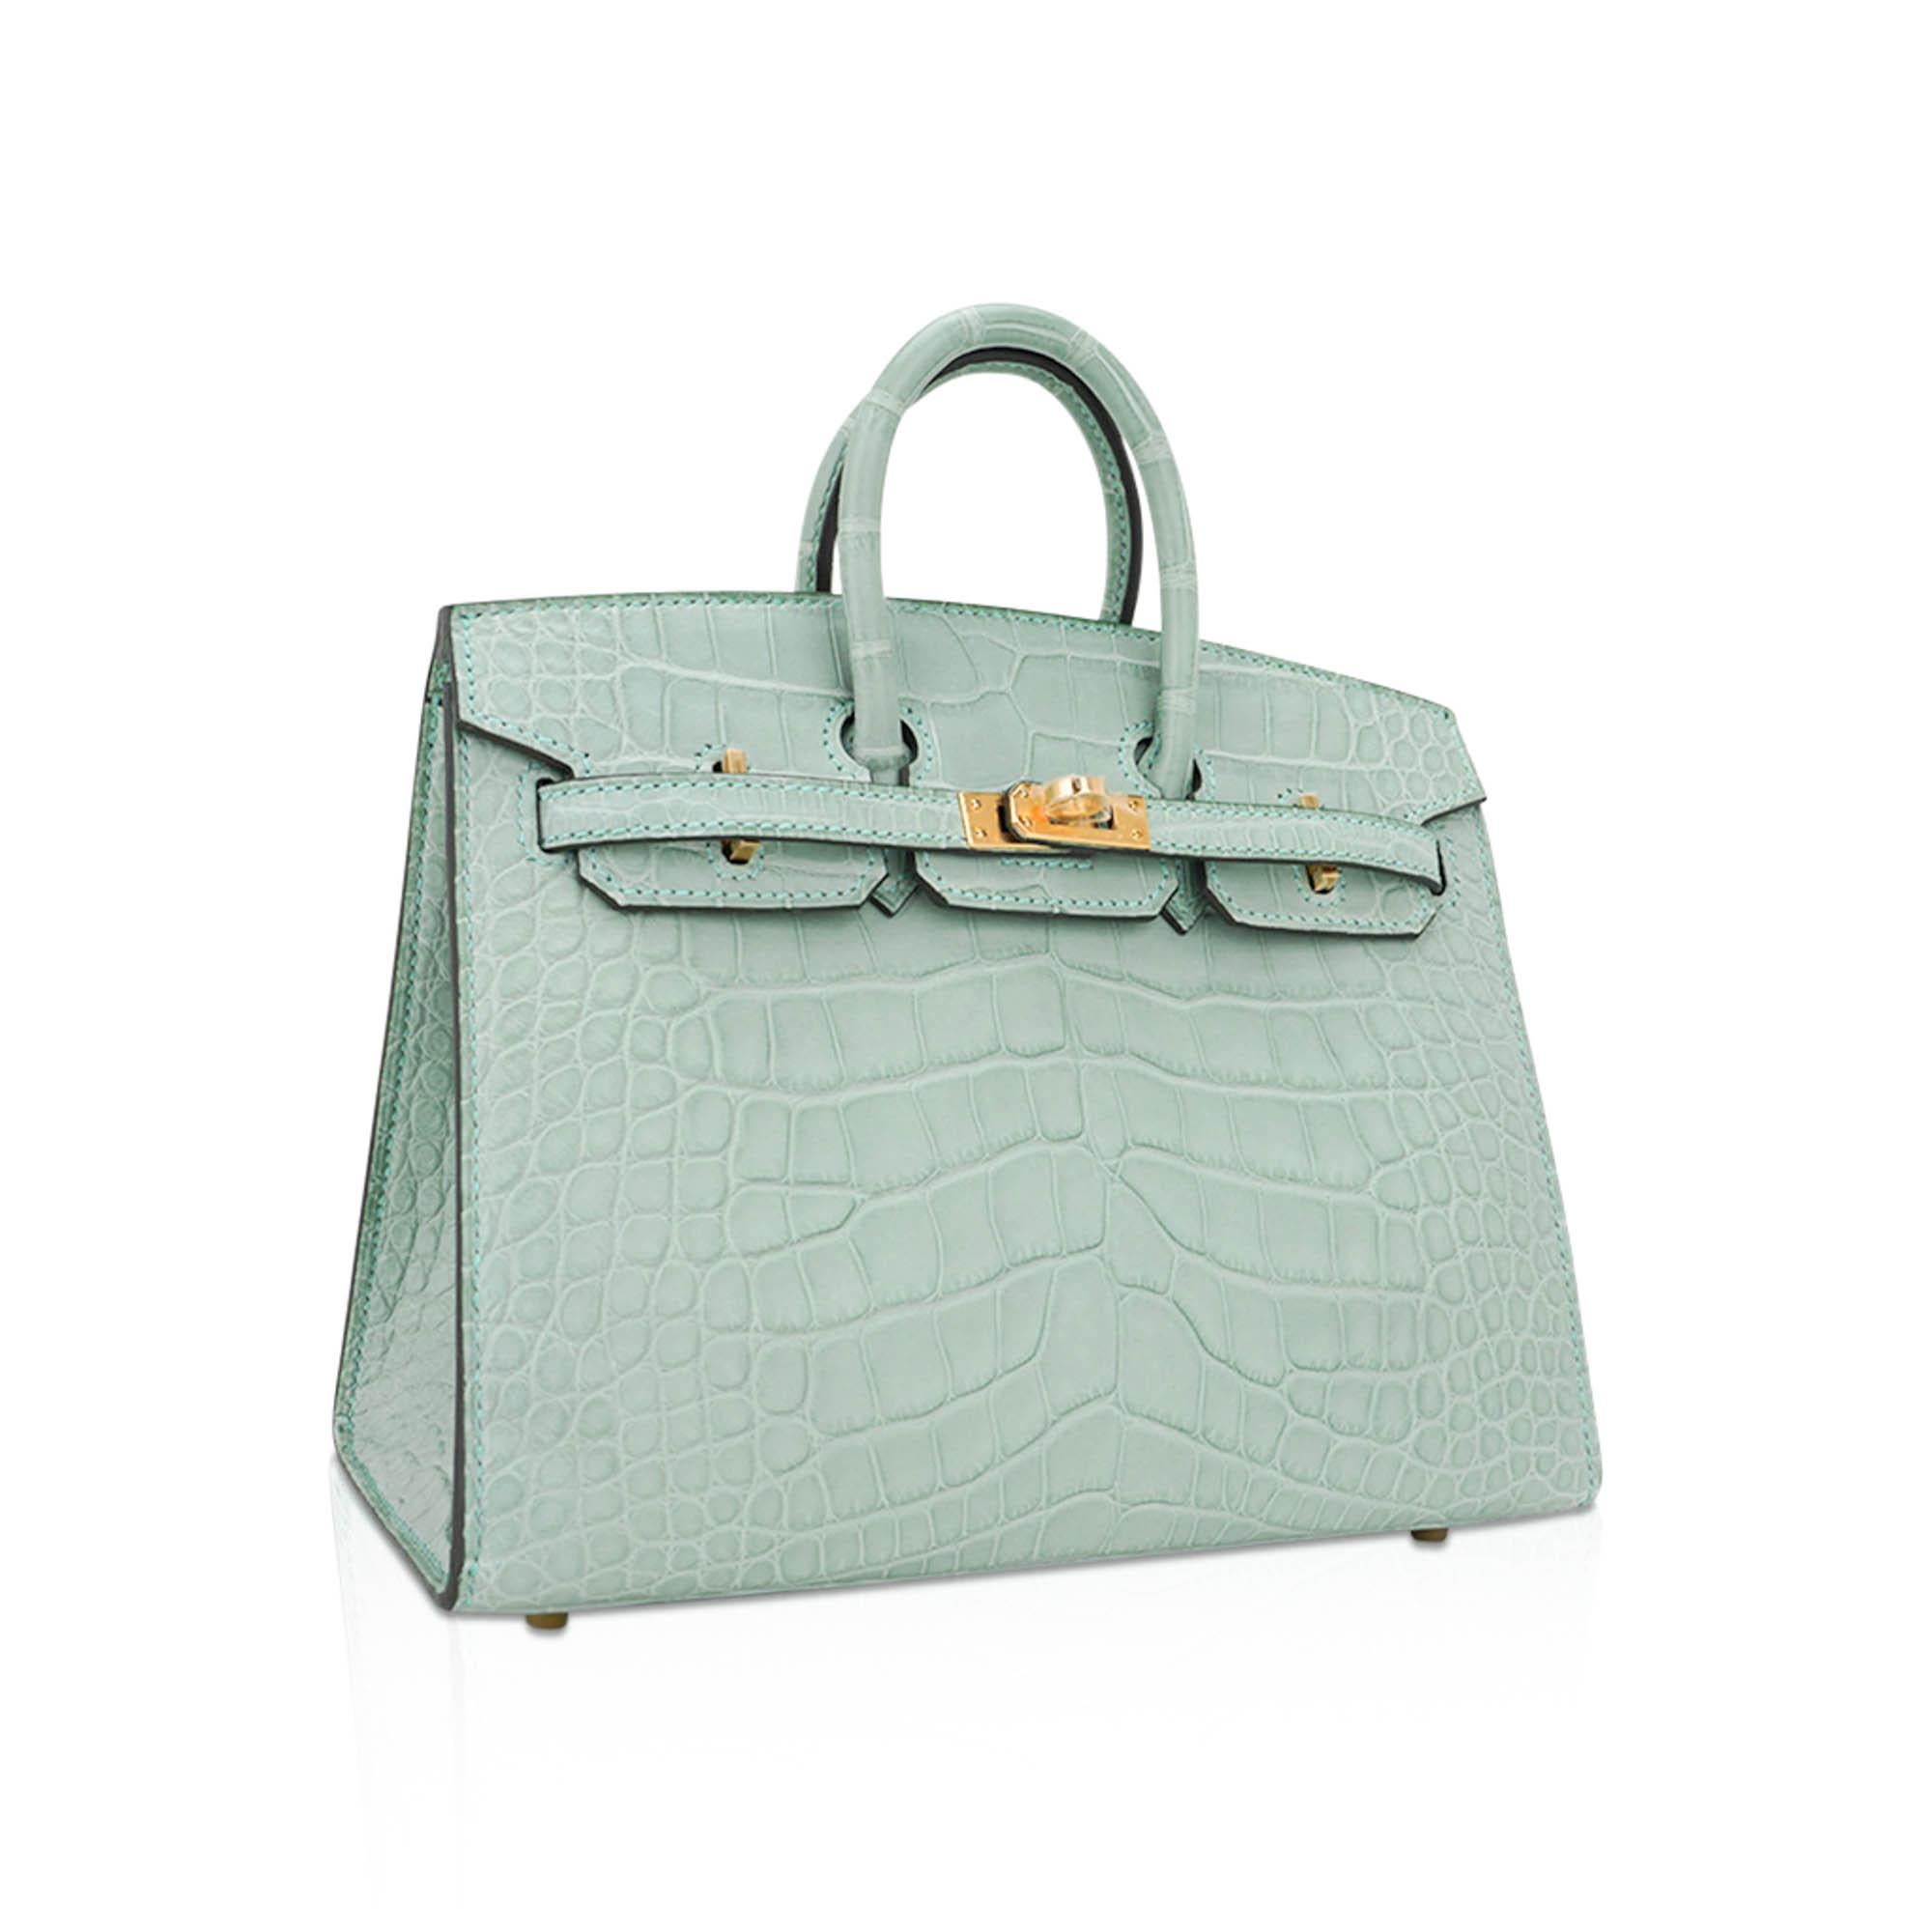 Mightychic offers a limited edition Hermes Birkin 20 Sellier bag featured in exquisite Vert D'Eau.
Small, chic, and so flirty - she is a crowning jewel to any Hermes collector.
This gorgeous soft clear water hue is neutral and perfect for year round